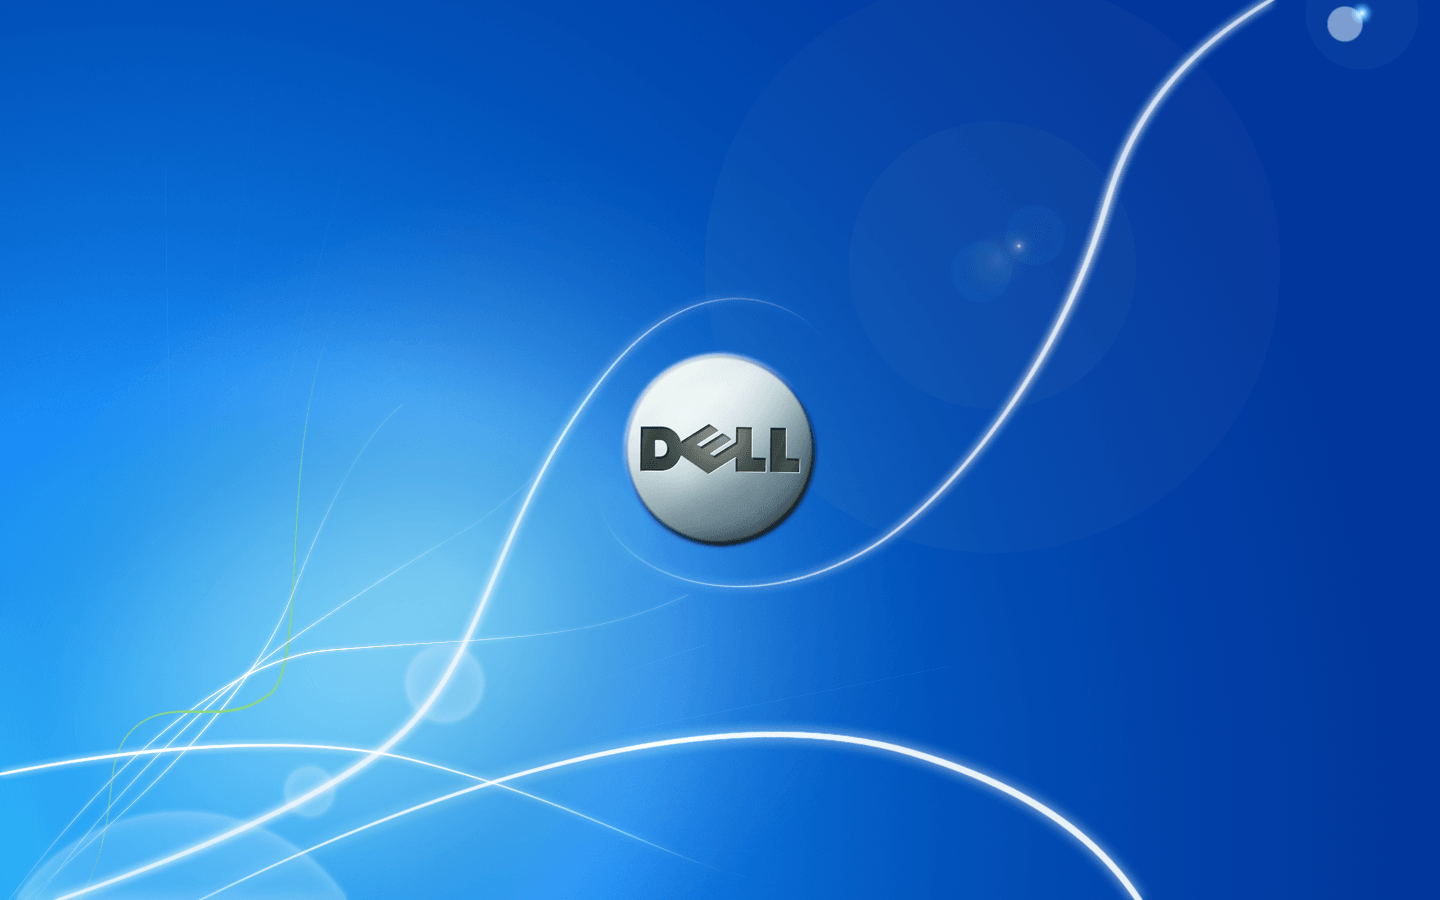 dell image Dell Wallpaper. HD wallpaper and background photo